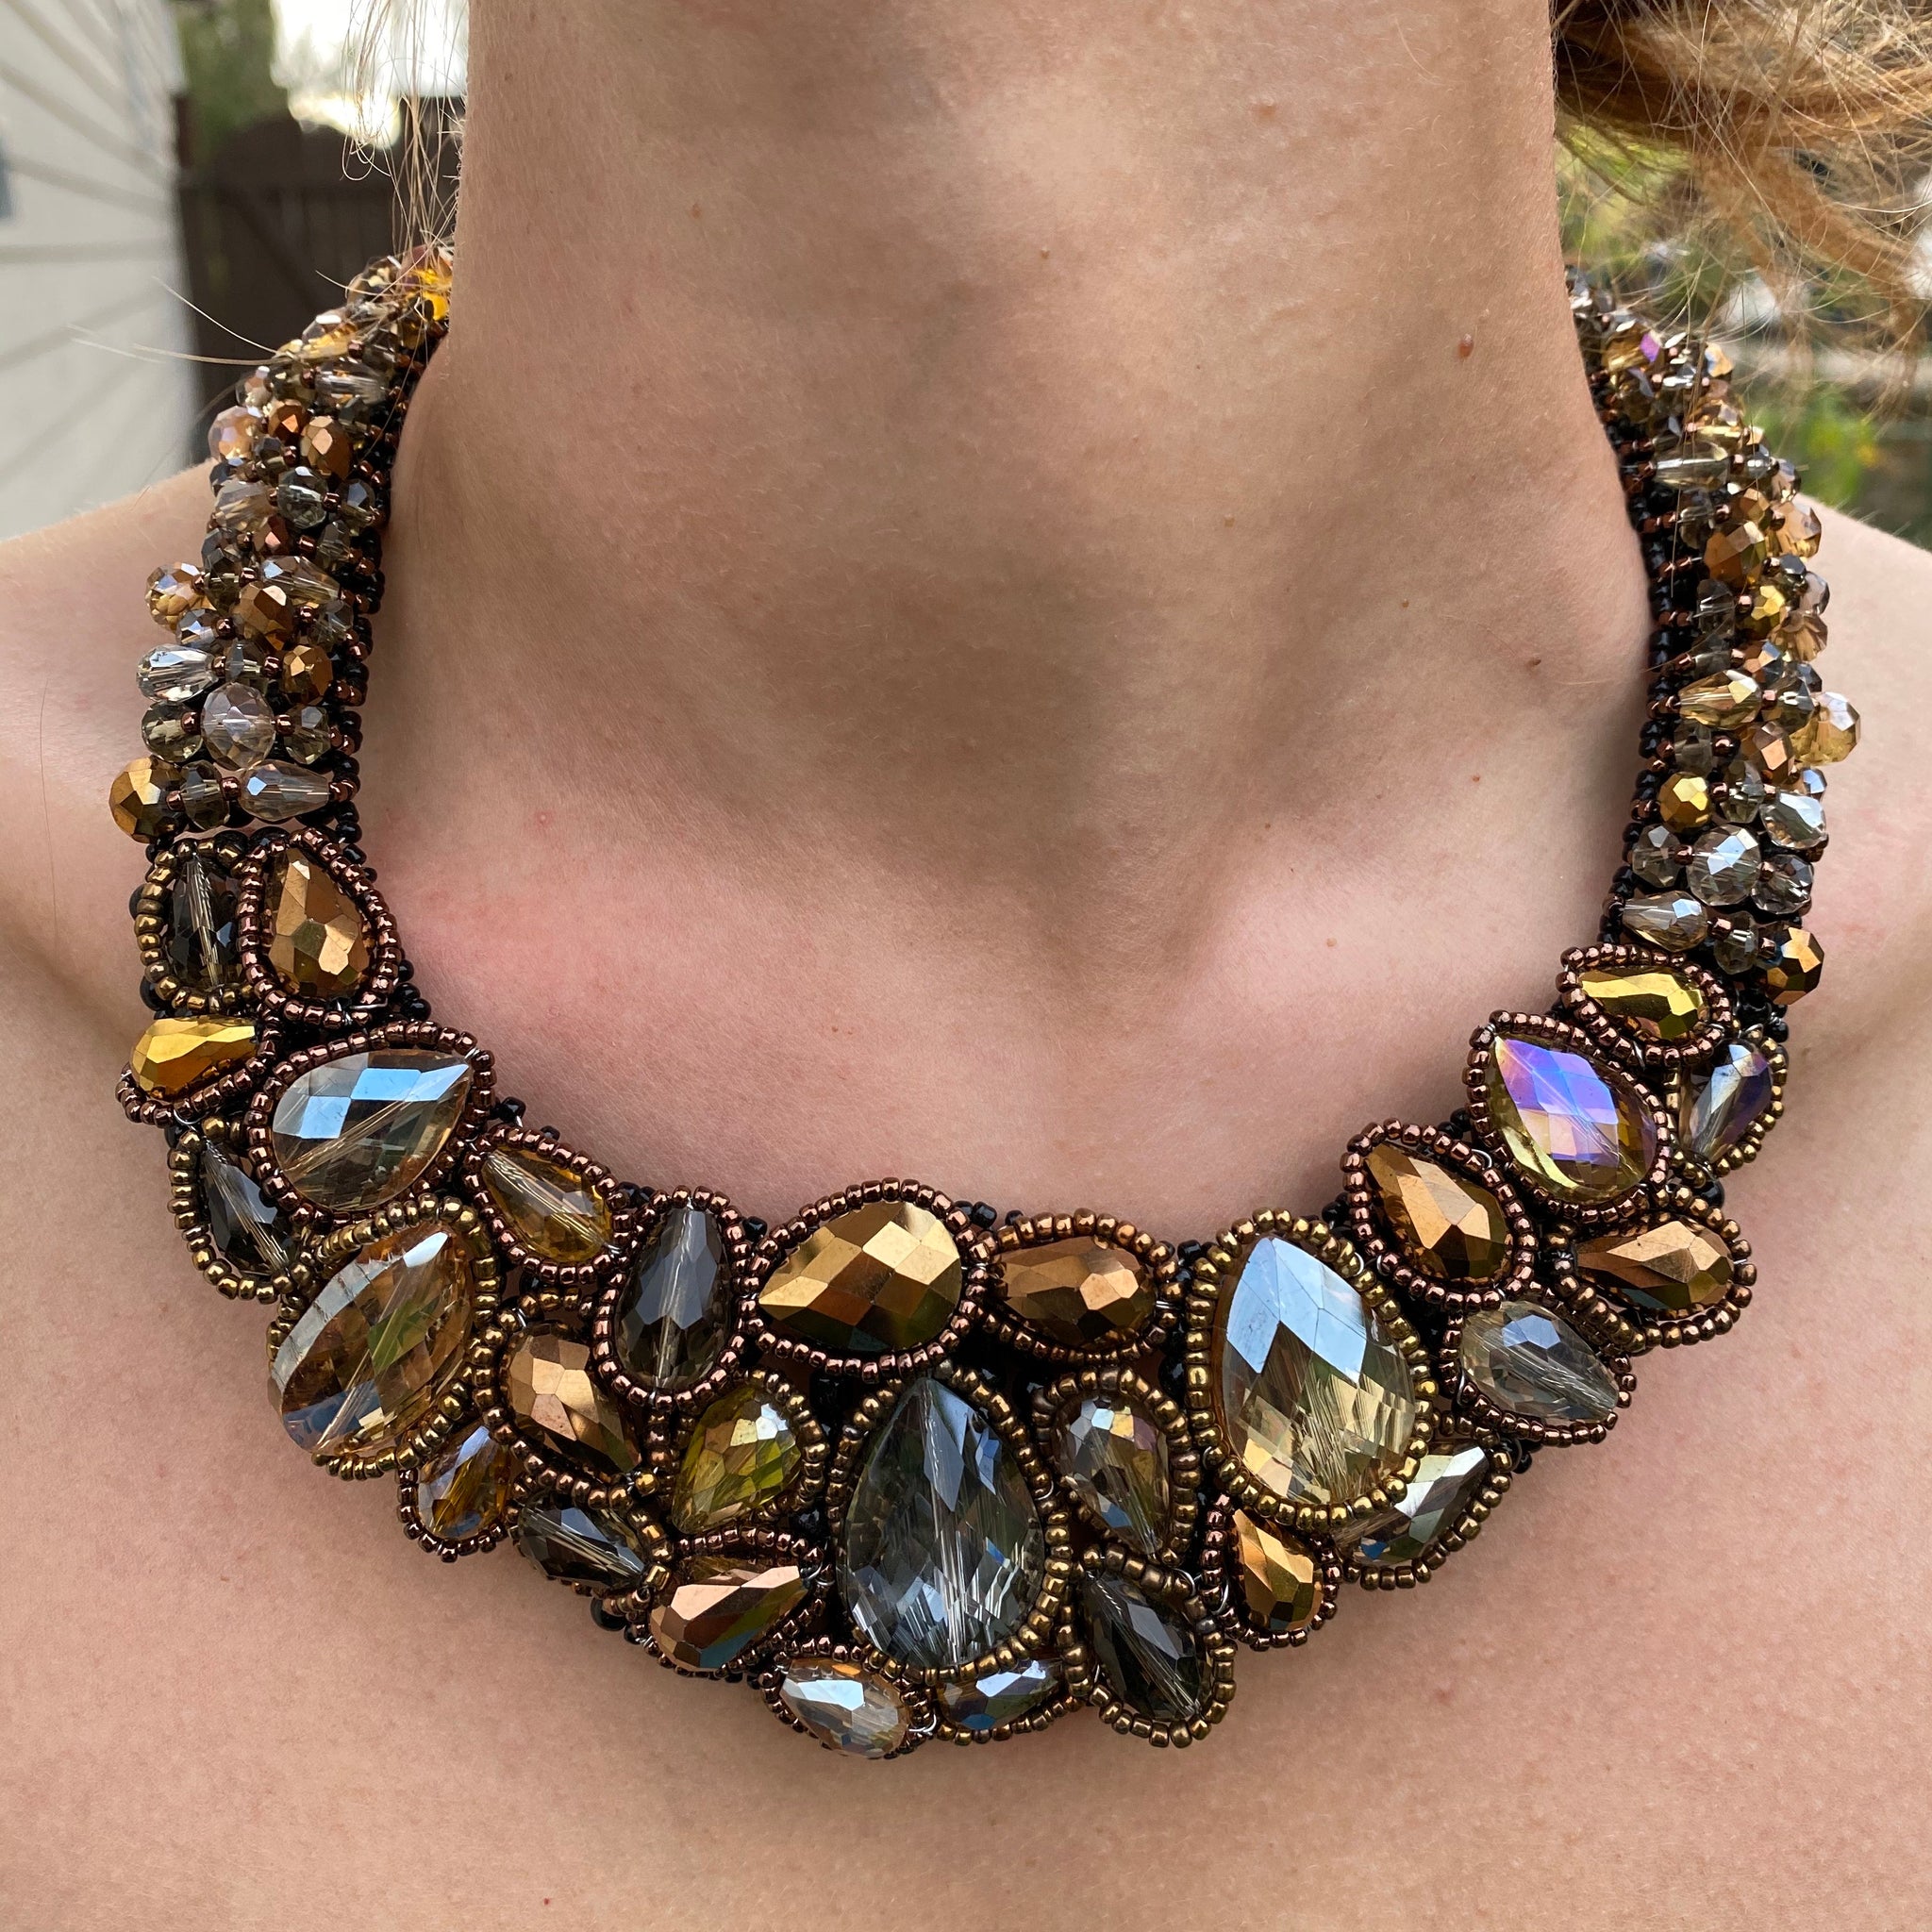 Handmade 20" Clustered Necklace Unique Bronze Beads Collar Choker